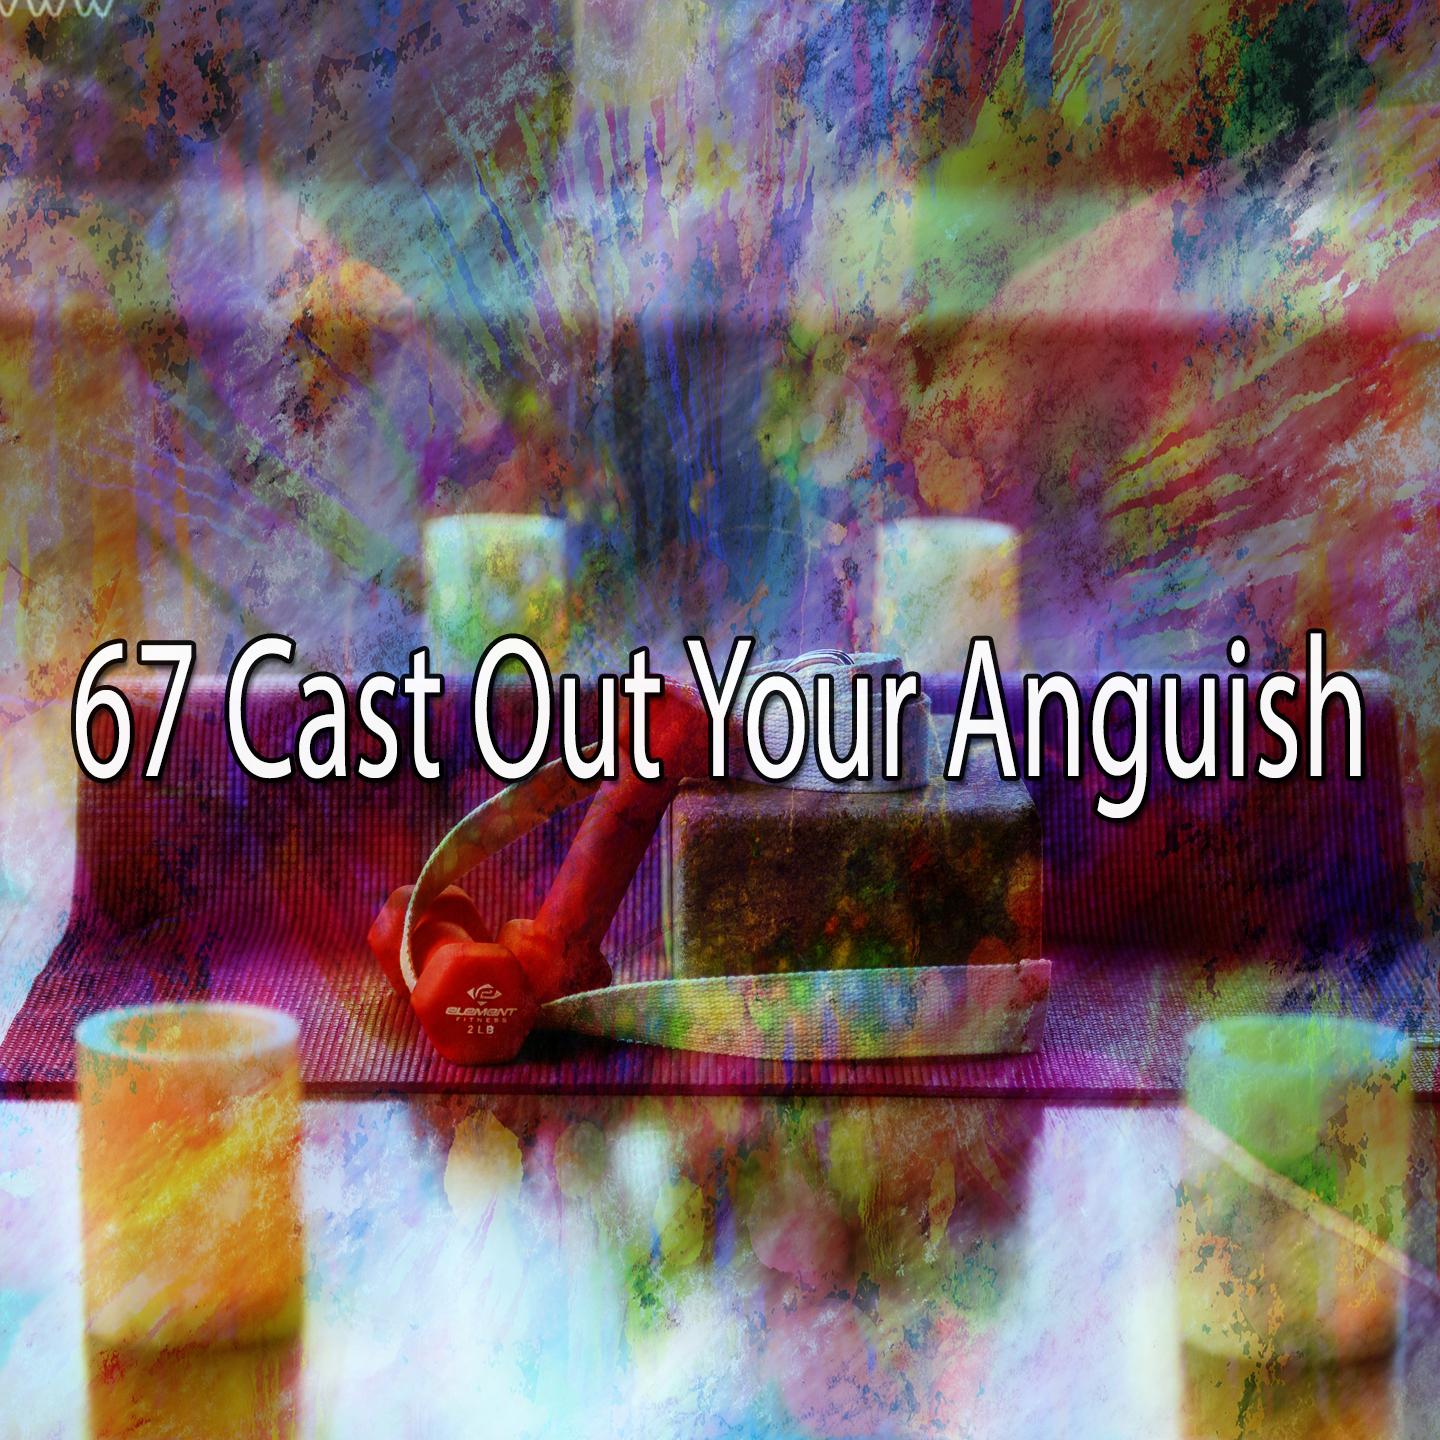 67 Cast out Your Anguish